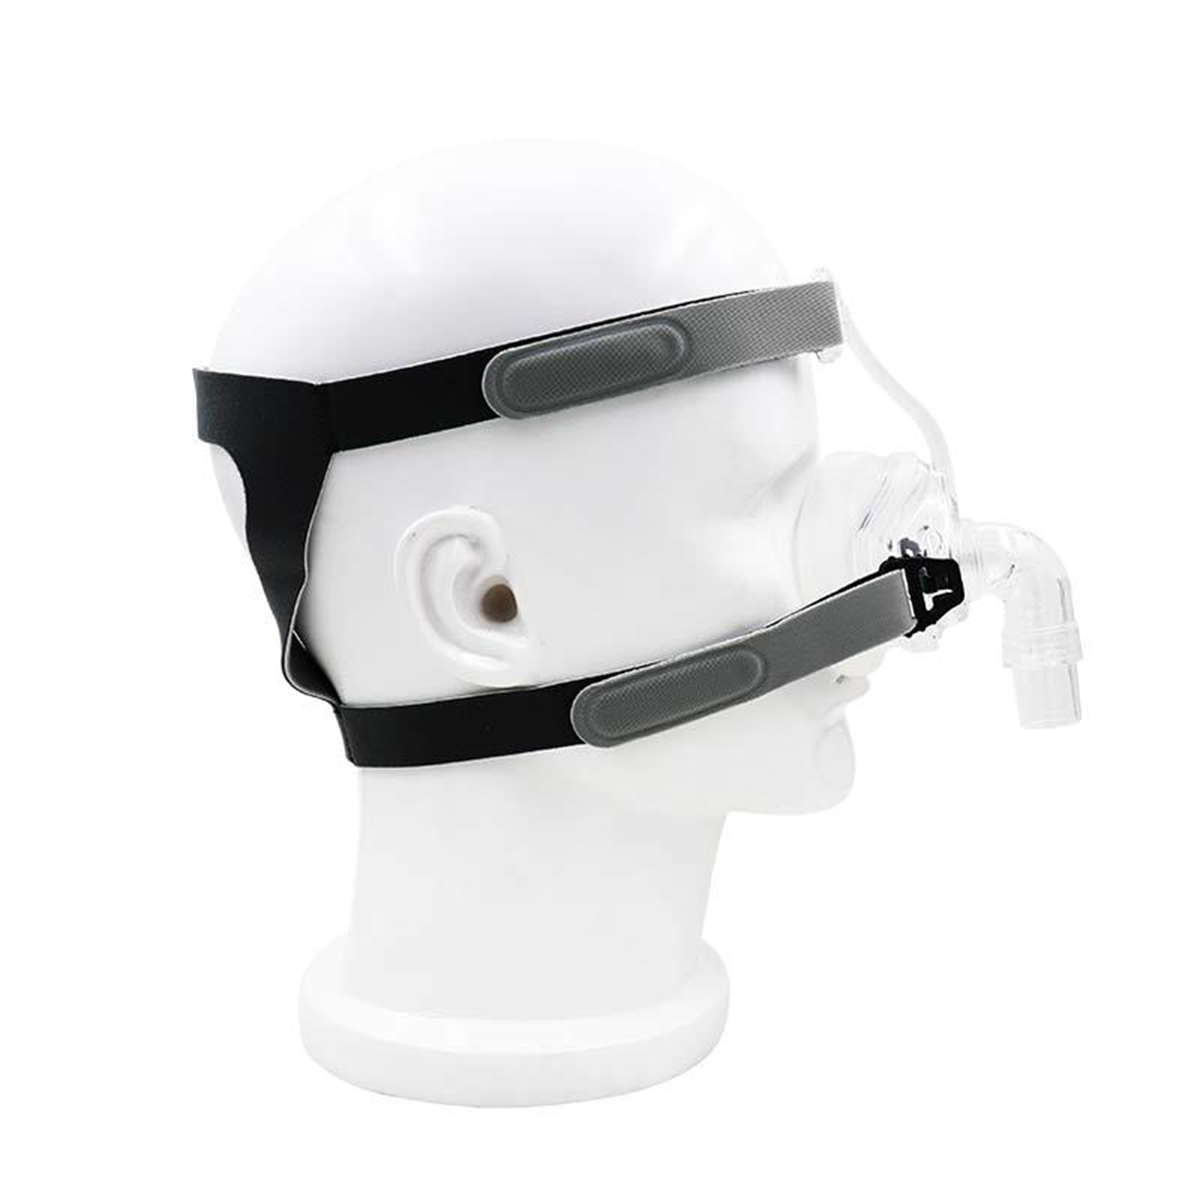 Nasal-Mask-NM2-For-CPAP-Masks-Interface-Sleep-Snore-Strap-w-Headgear-1347205-3